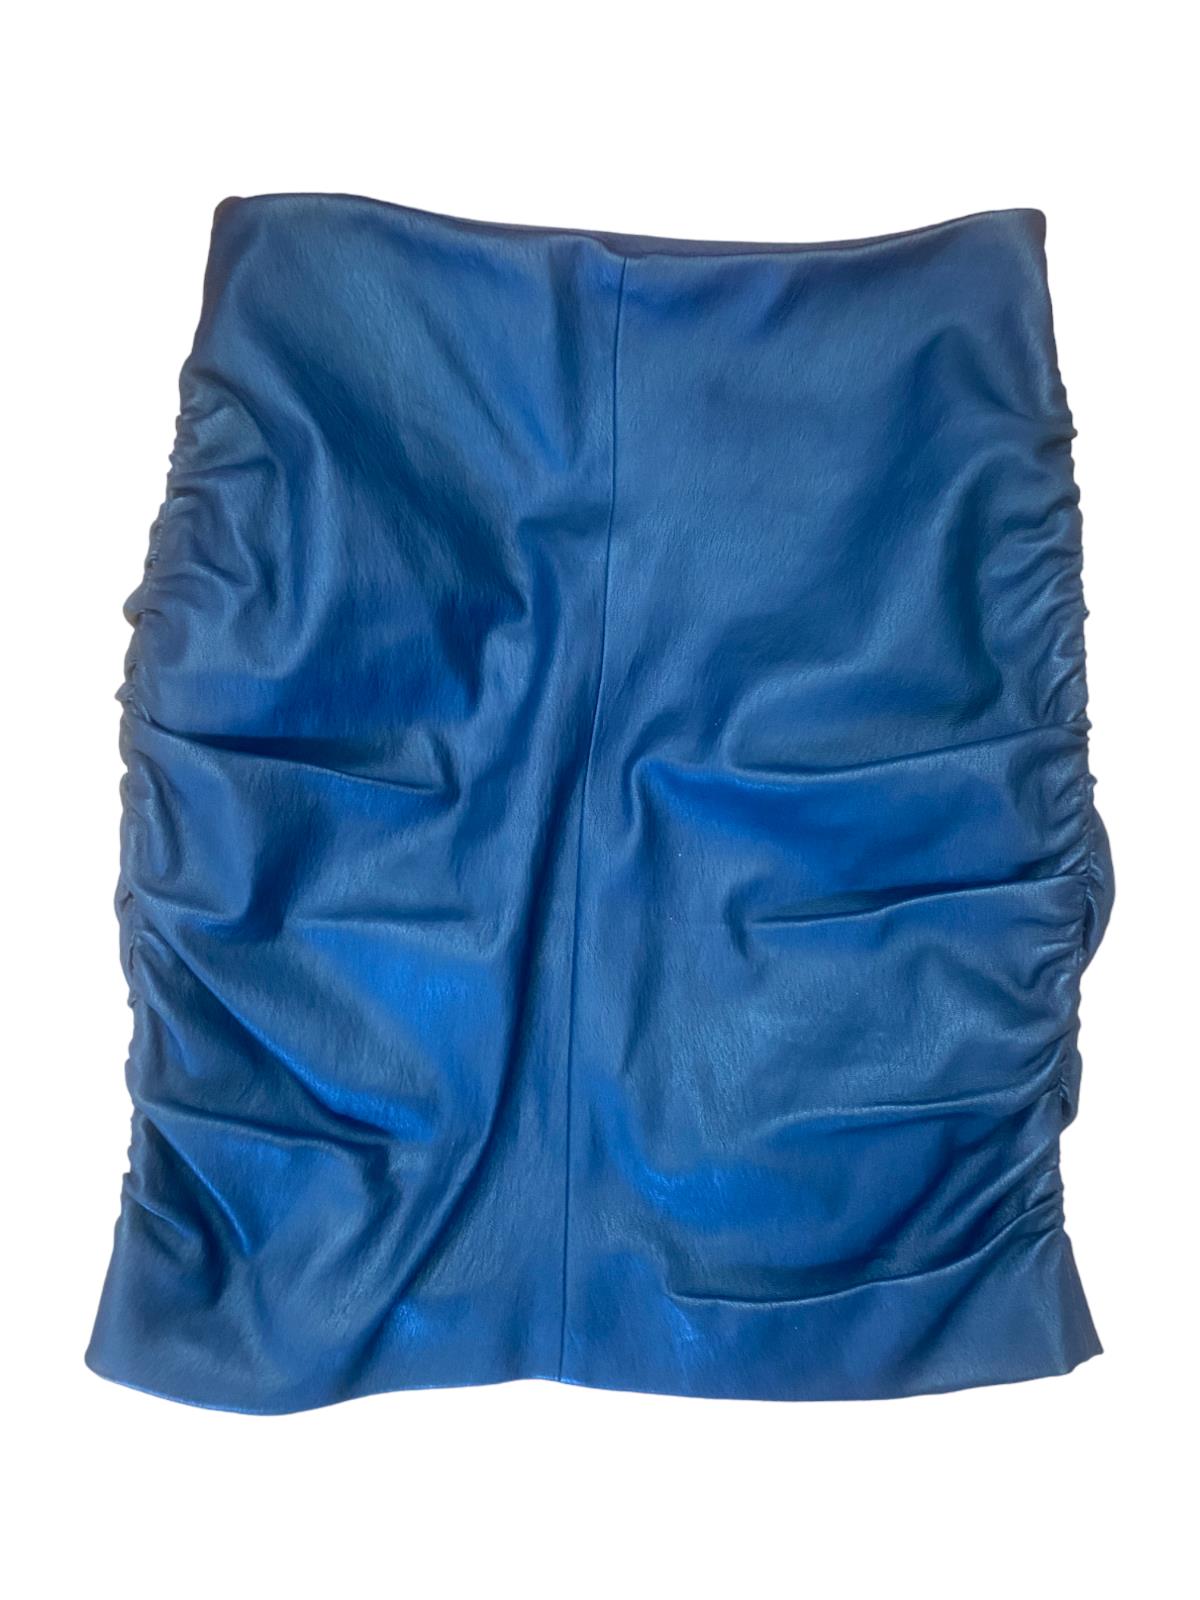 Scanlan Theodore French Leather Skirt | Midi/Mini, Stretch, Ruched Sides, Pencil